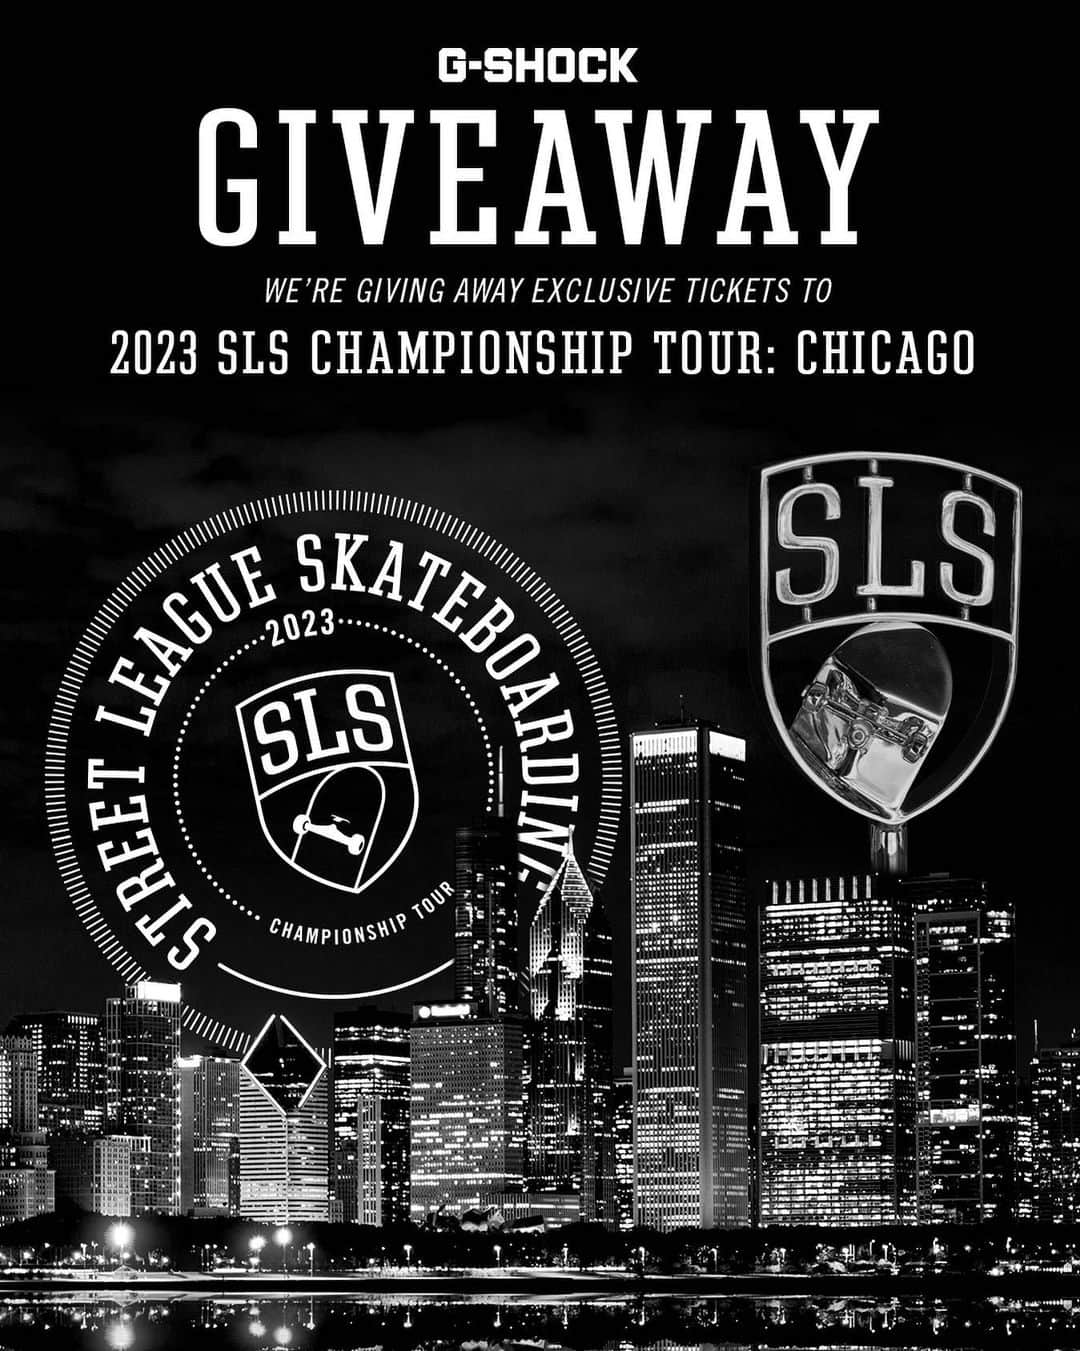 G-SHOCKのインスタグラム：「IT’S TIME FOR A #GIVEAWAY!  We’ve teamed up with SLS to give you the ultimate skaters experience! We’re choosing TWO (2) winners to receive two (2) 100 Level tickets as grand prize winners PLUS an SLS gift bag with branded merch for you and a friend, and TWO (2) additional winners for two (2) 200 level tickets as a 2nd prize to this year’s Championship Tour event in Chicago, IL on April 29th!  How to enter: 🛹 Follow @gshock_us 🛹 Like this post 🛹 Leave a comment tagging two friends 🛹 Enter your email at our Lnk.Bio  One entry per person. Entries close on 4/24. 18+ to enter. T+C: http://get.gshock.com/terms-and-conditions-gshock-sls-sweepstakes/  #GSHOCK #gshockwatch」